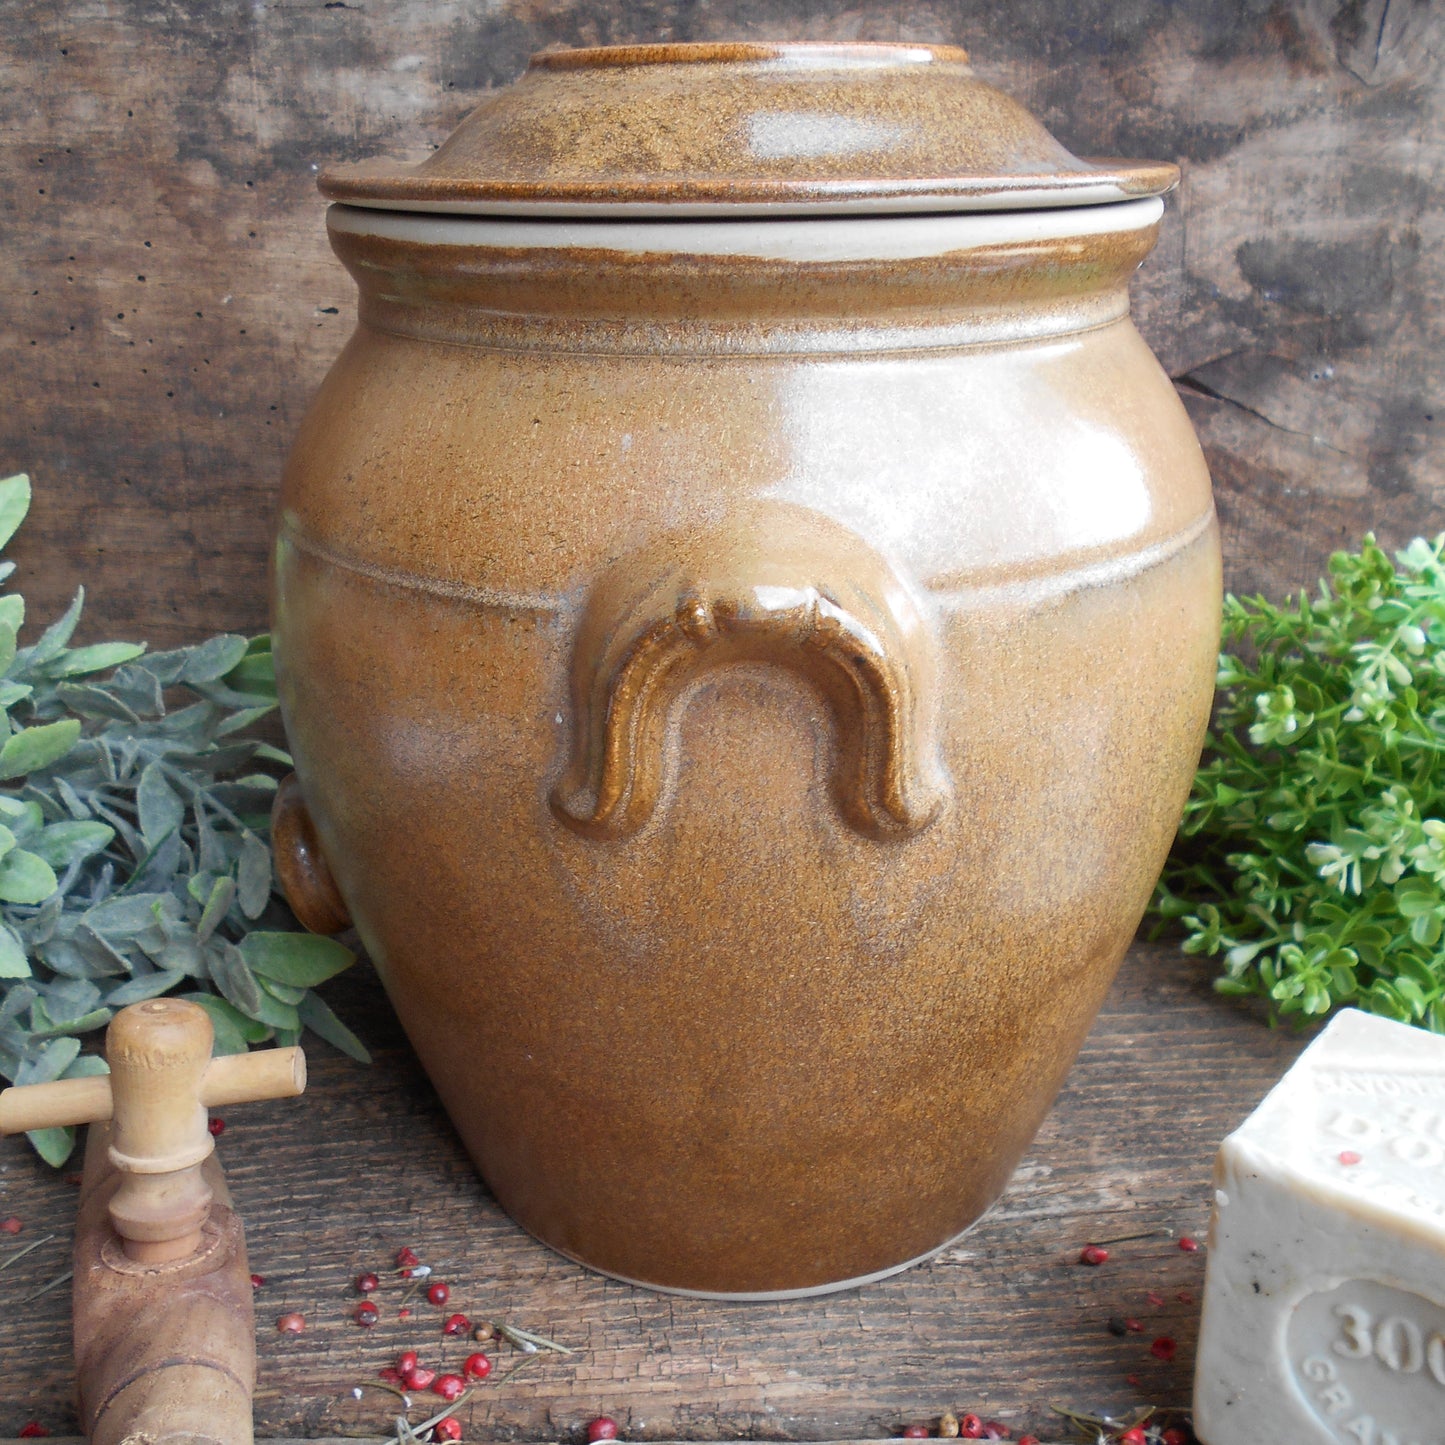 Large Stoneware Oil Jar with Lid, Handles and Tap/Cork Opening. from Tiggy & Pip - €159.00! Shop now at Tiggy and Pip